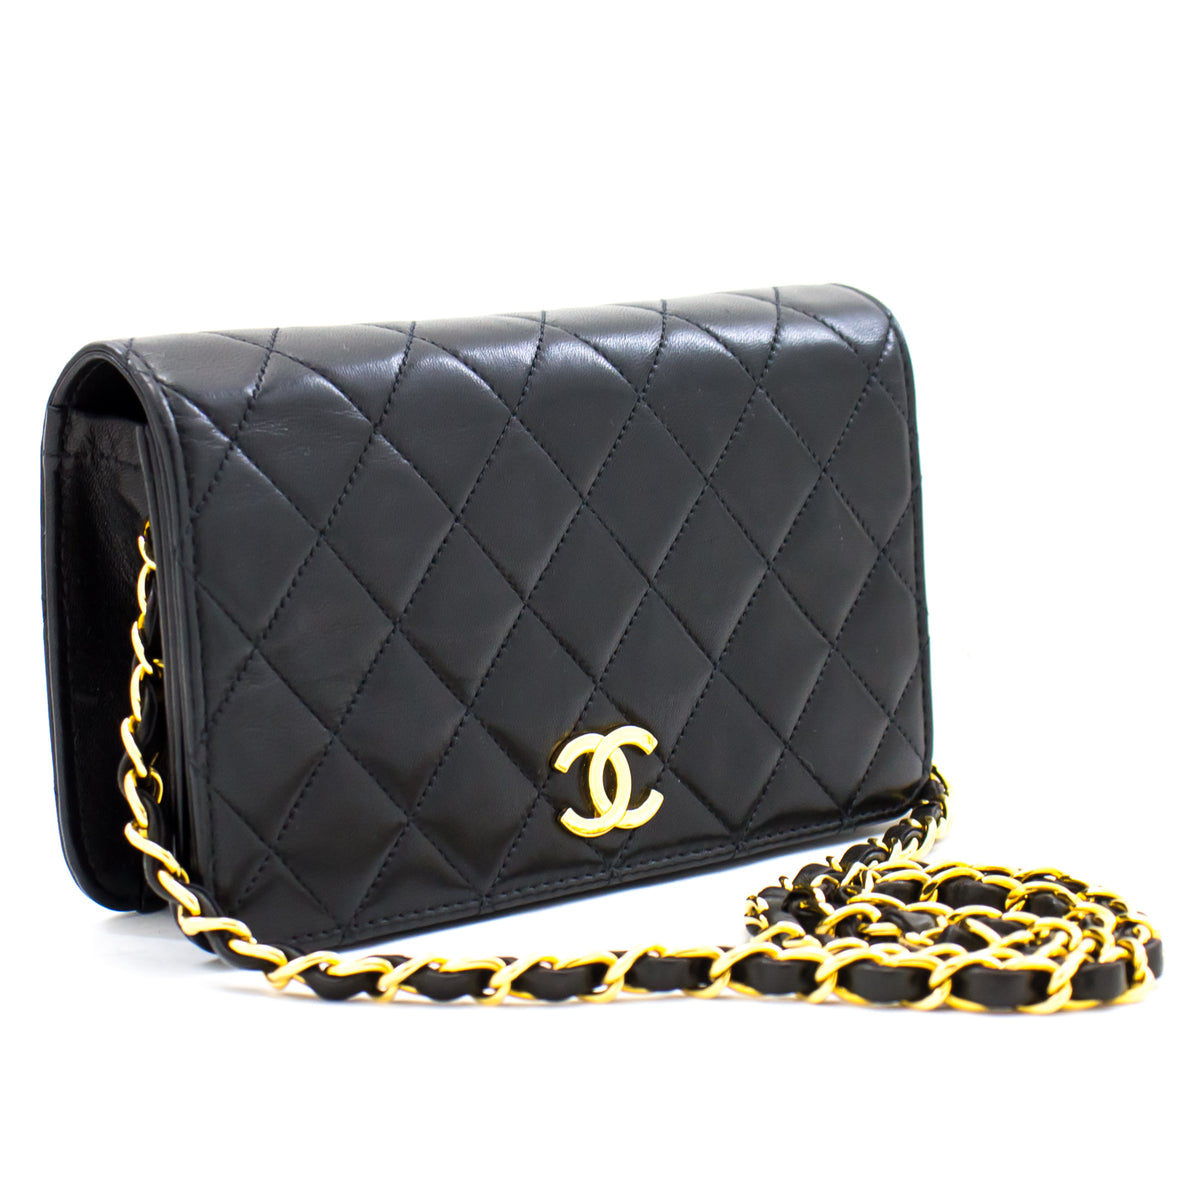 chanel black quilted bag leather